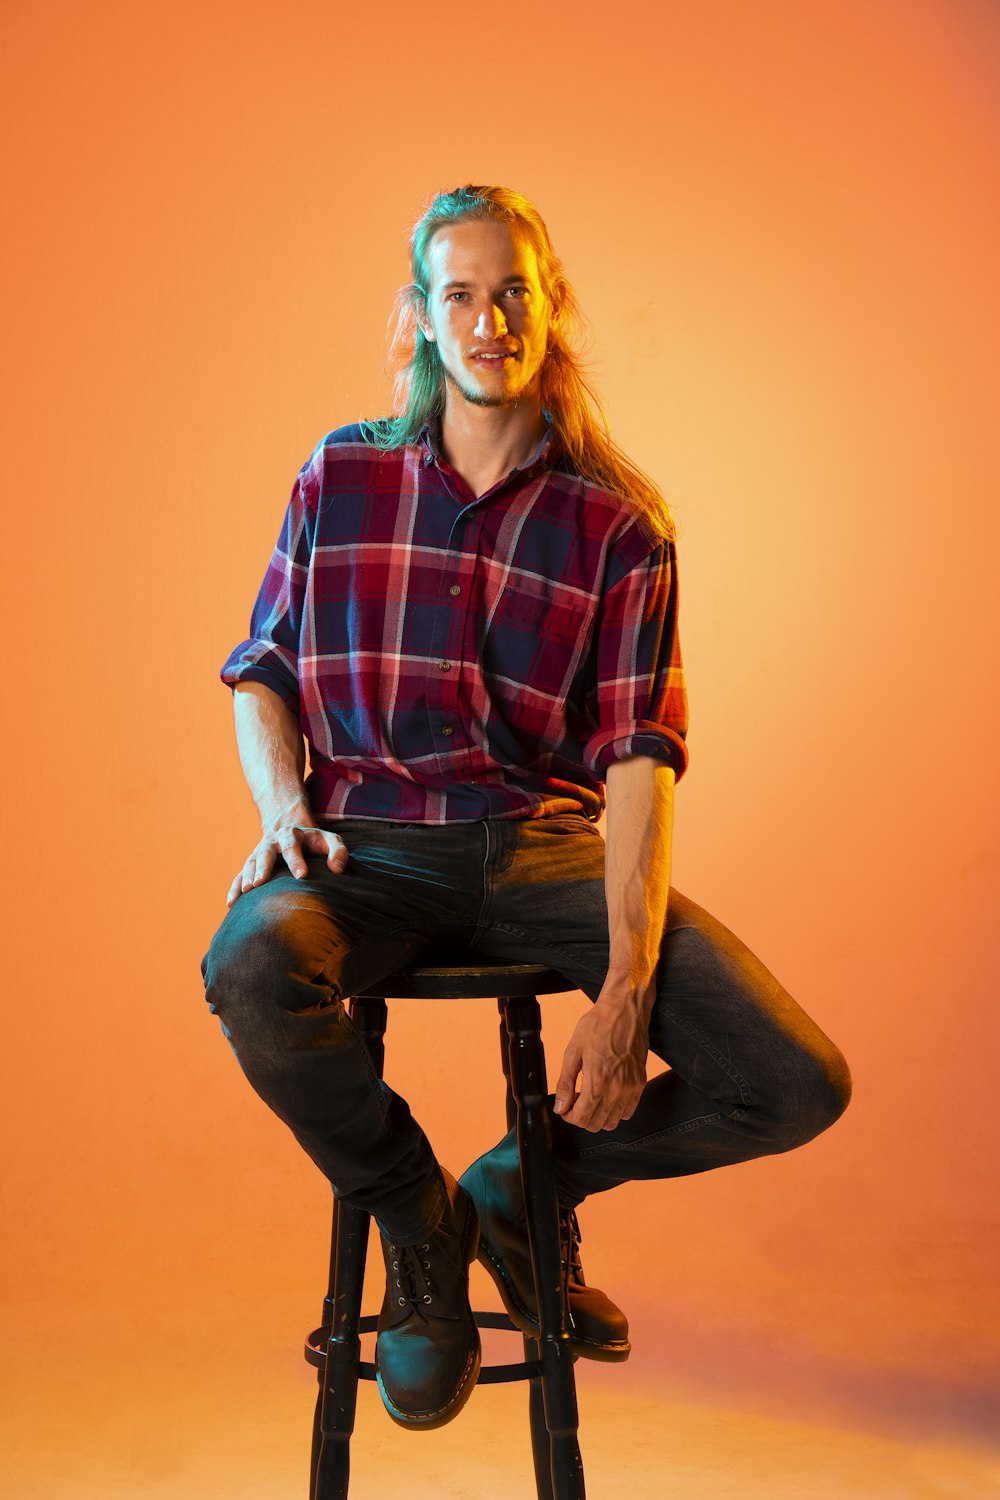 a person sitting on a chair